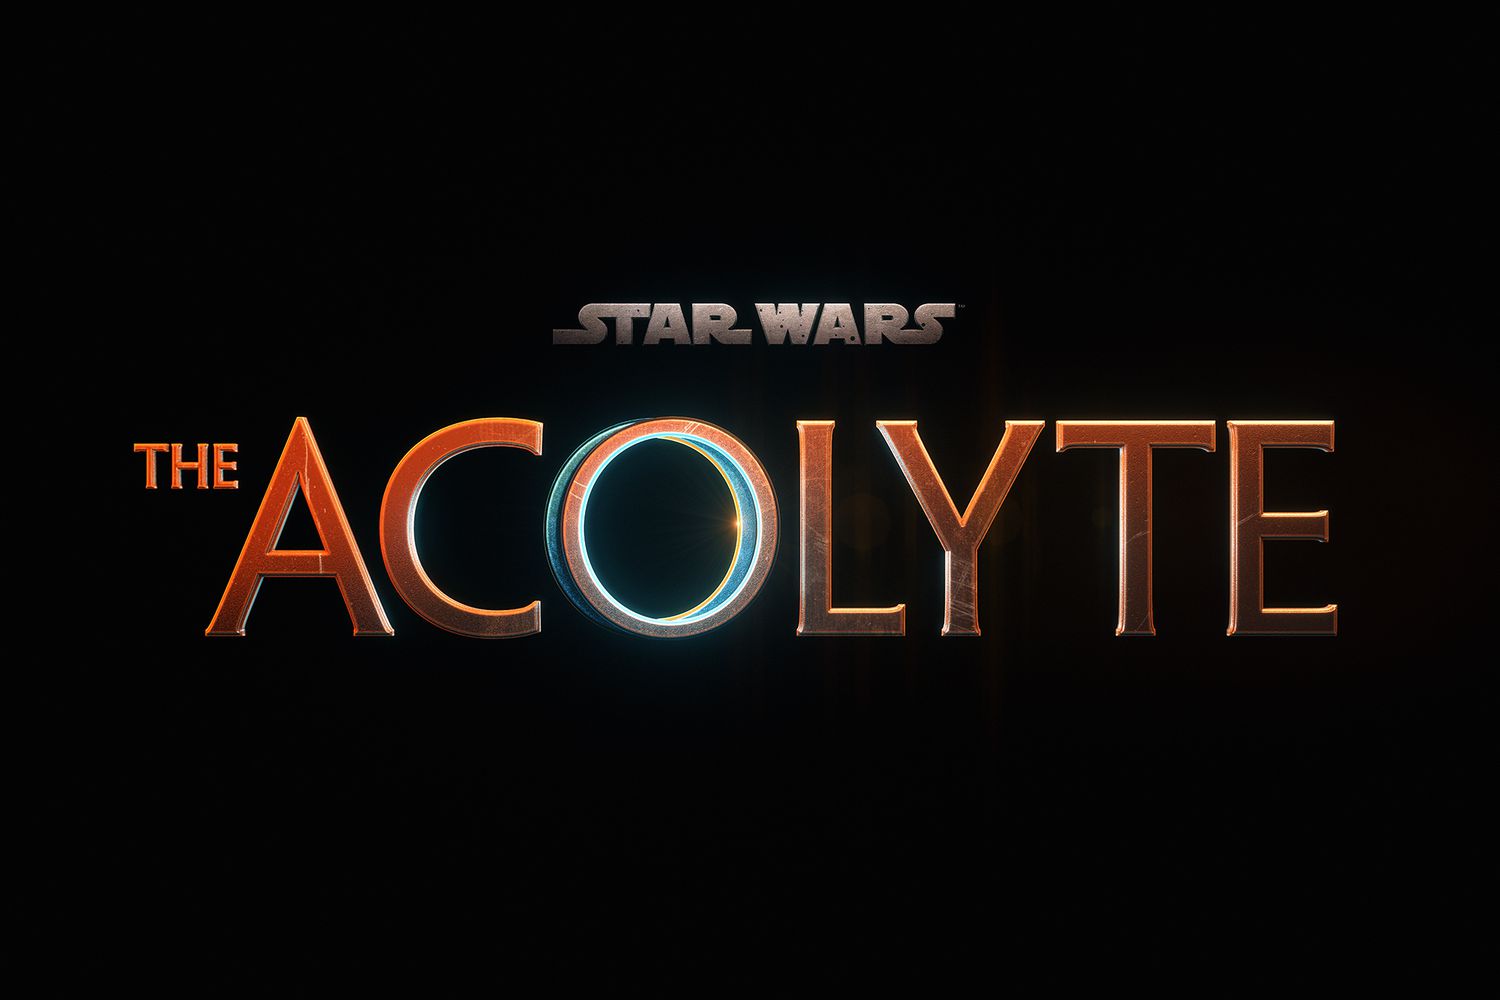 STAR WARS: THE ACOLYTE